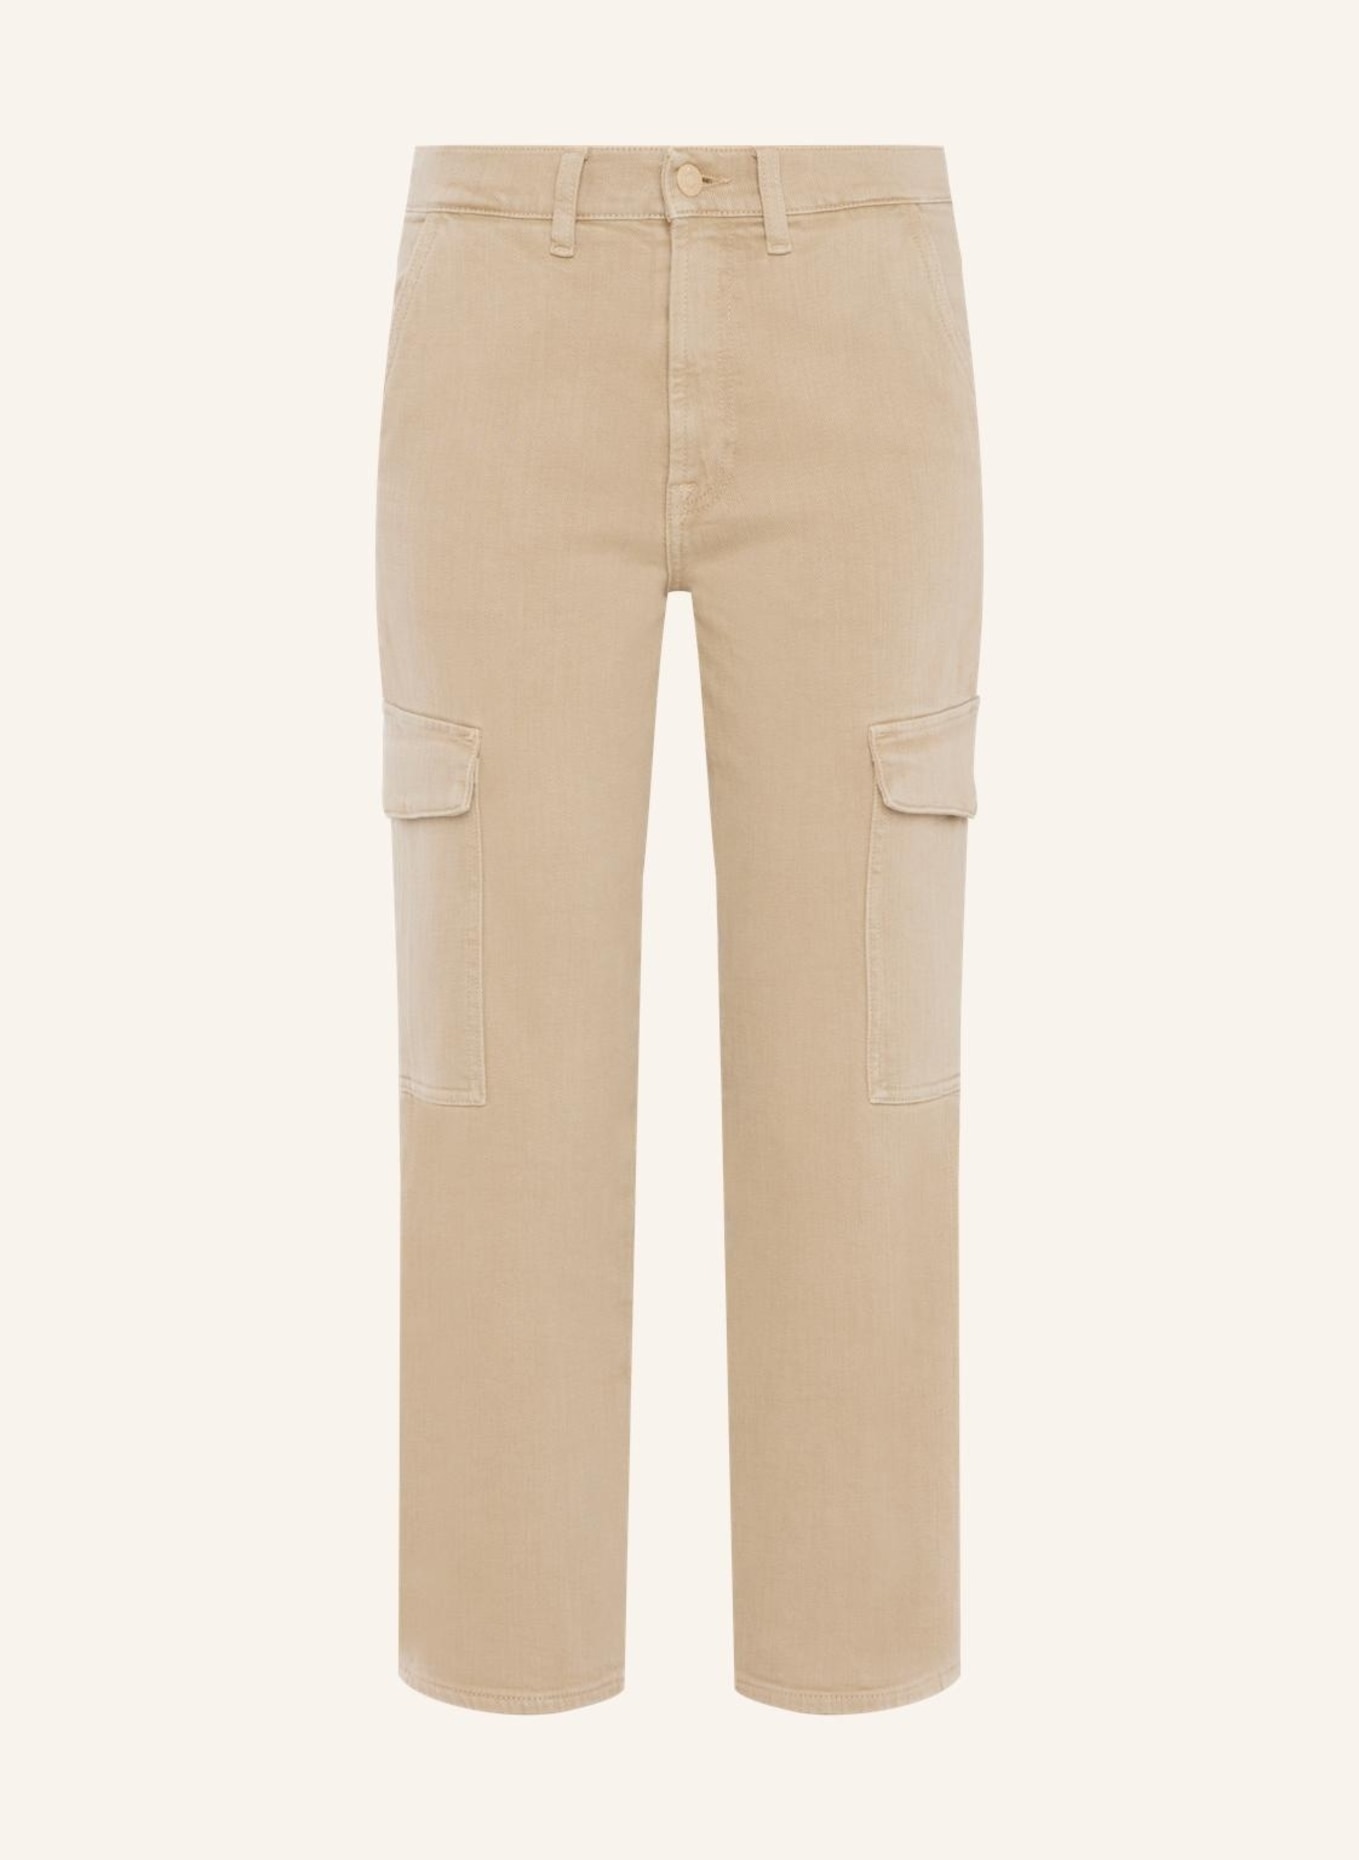 7 for all mankind Pant CARGO LOGAN Cargo fit, Farbe: BEIGE (Bild 1)